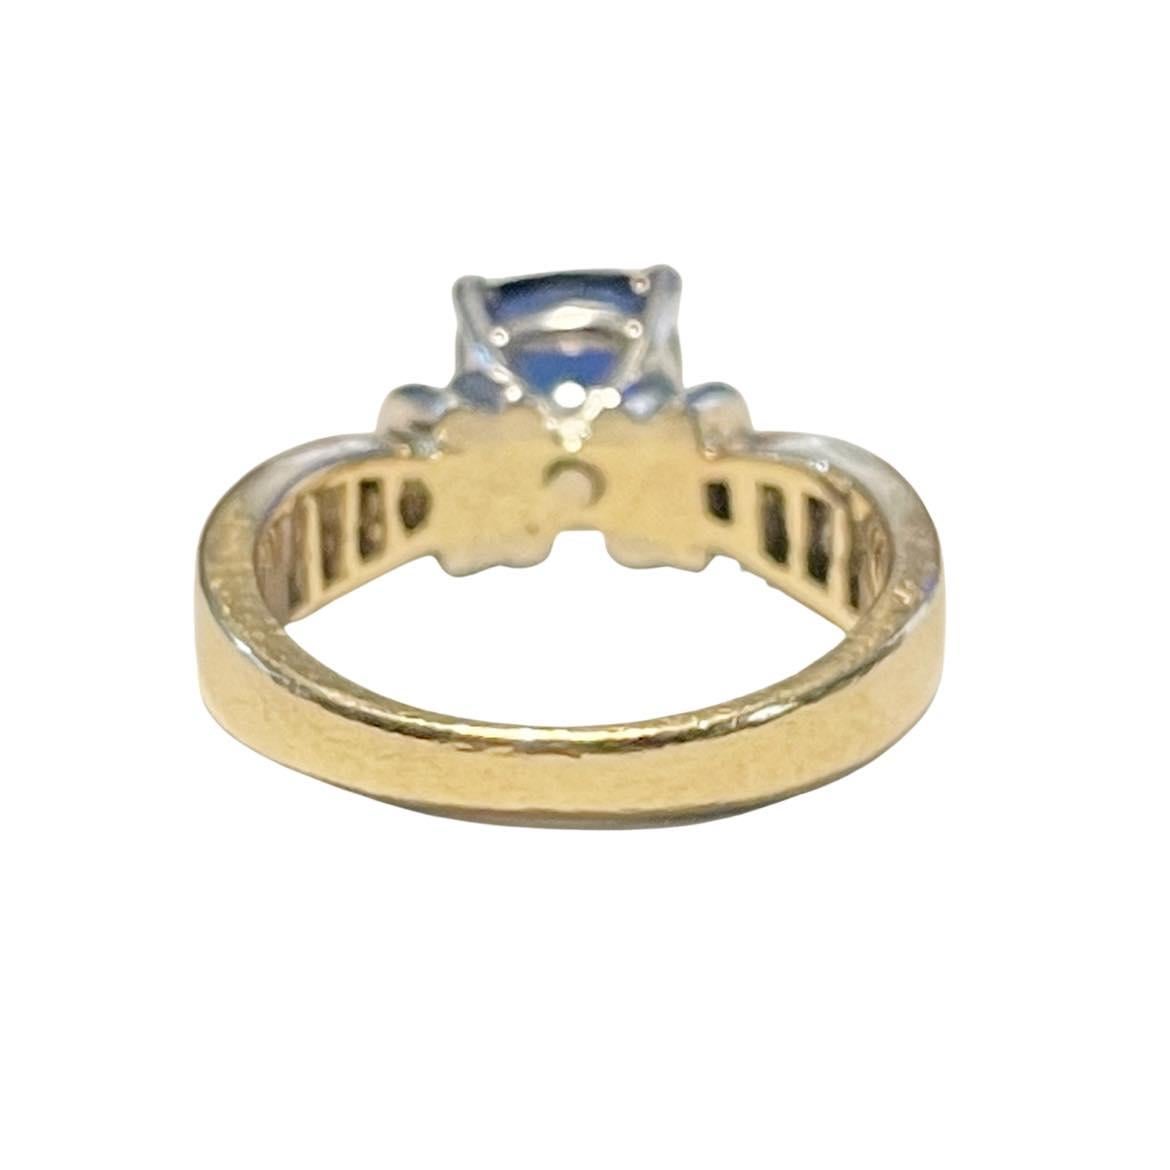 Here we have a classic two tone retro design. This yellow gold tapered shanks taper out and in at the top and bottom of the ring. In the center of the shanks are channel set baguettes giving the ring a dynamic design. In the center is a white gold